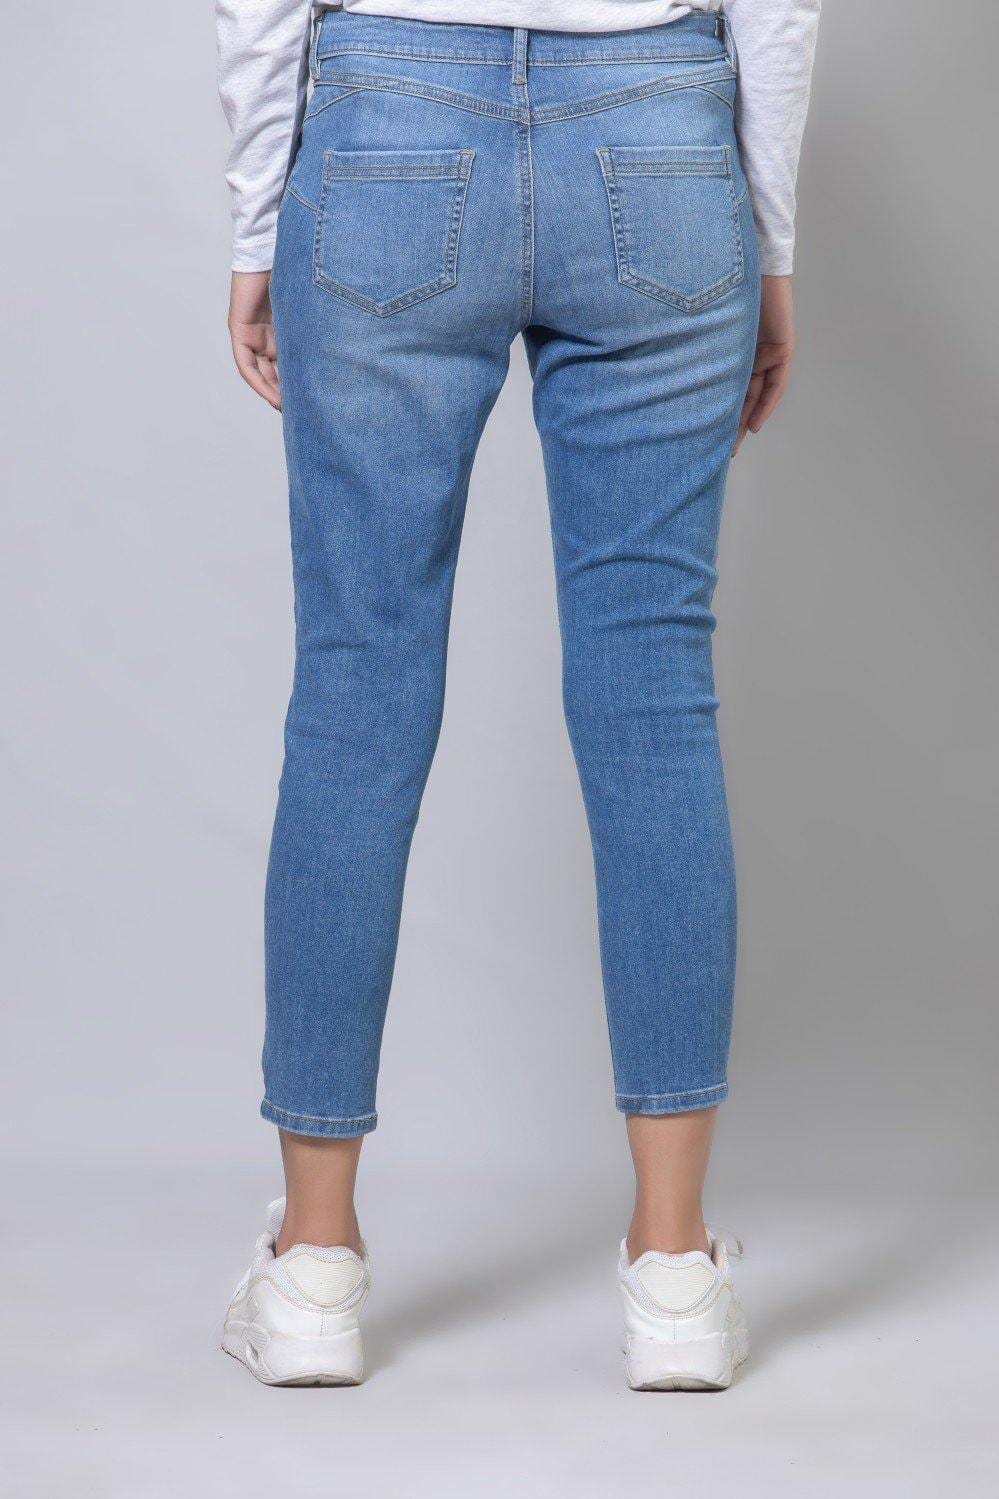 Hope Not Out by Shahid Afridi Women Jeans Blue Denim HWBDF20052